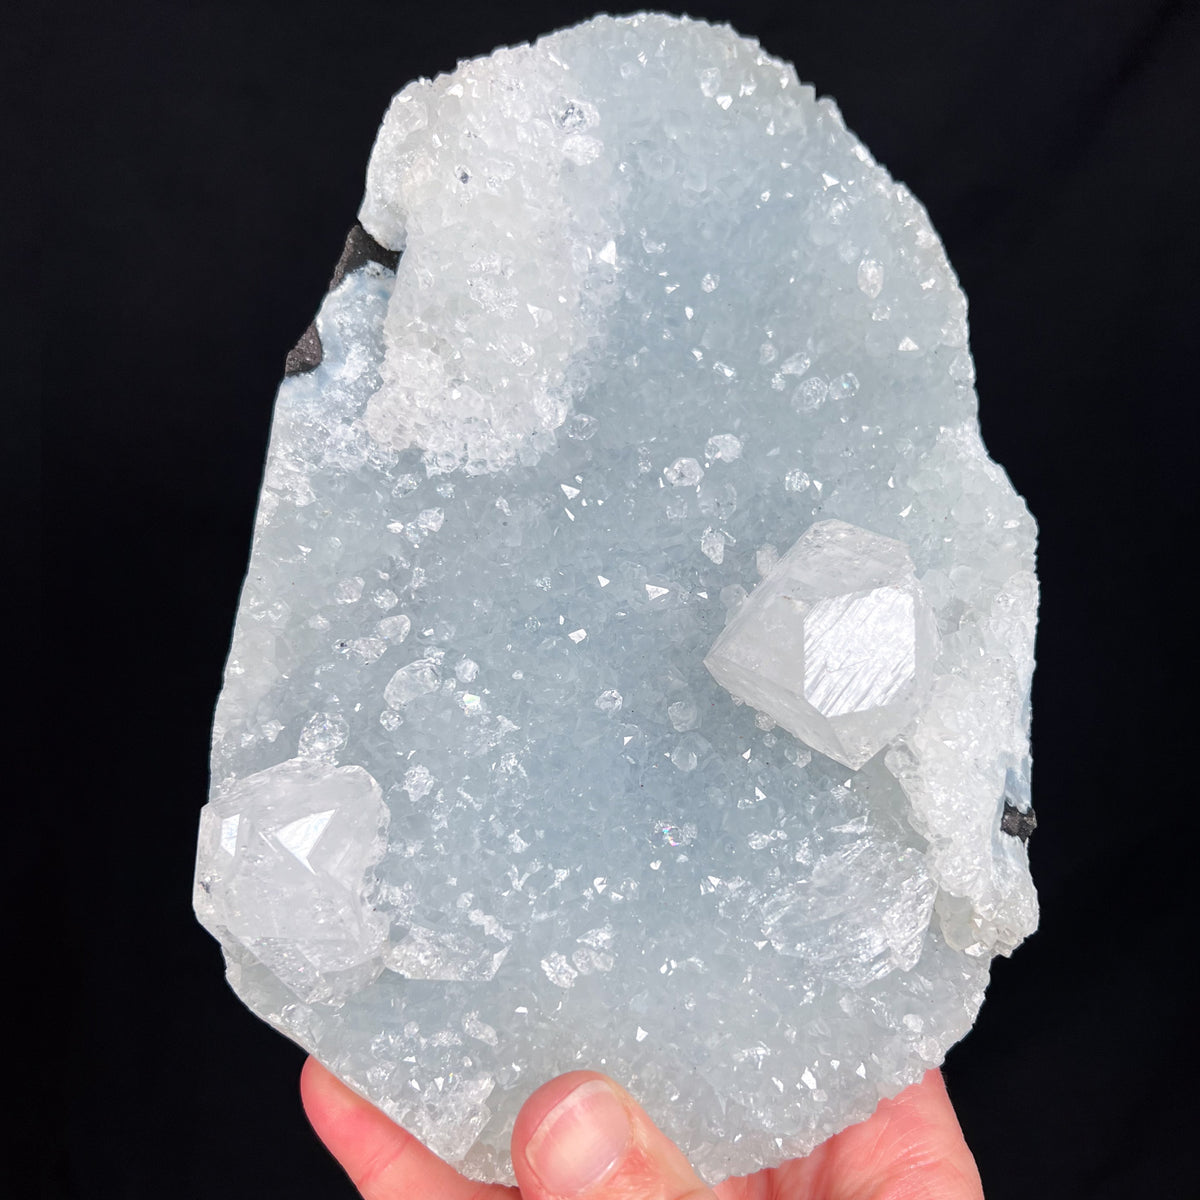 Apophyllite Mineral Specimen with Quartz Crystals and Chalcedony